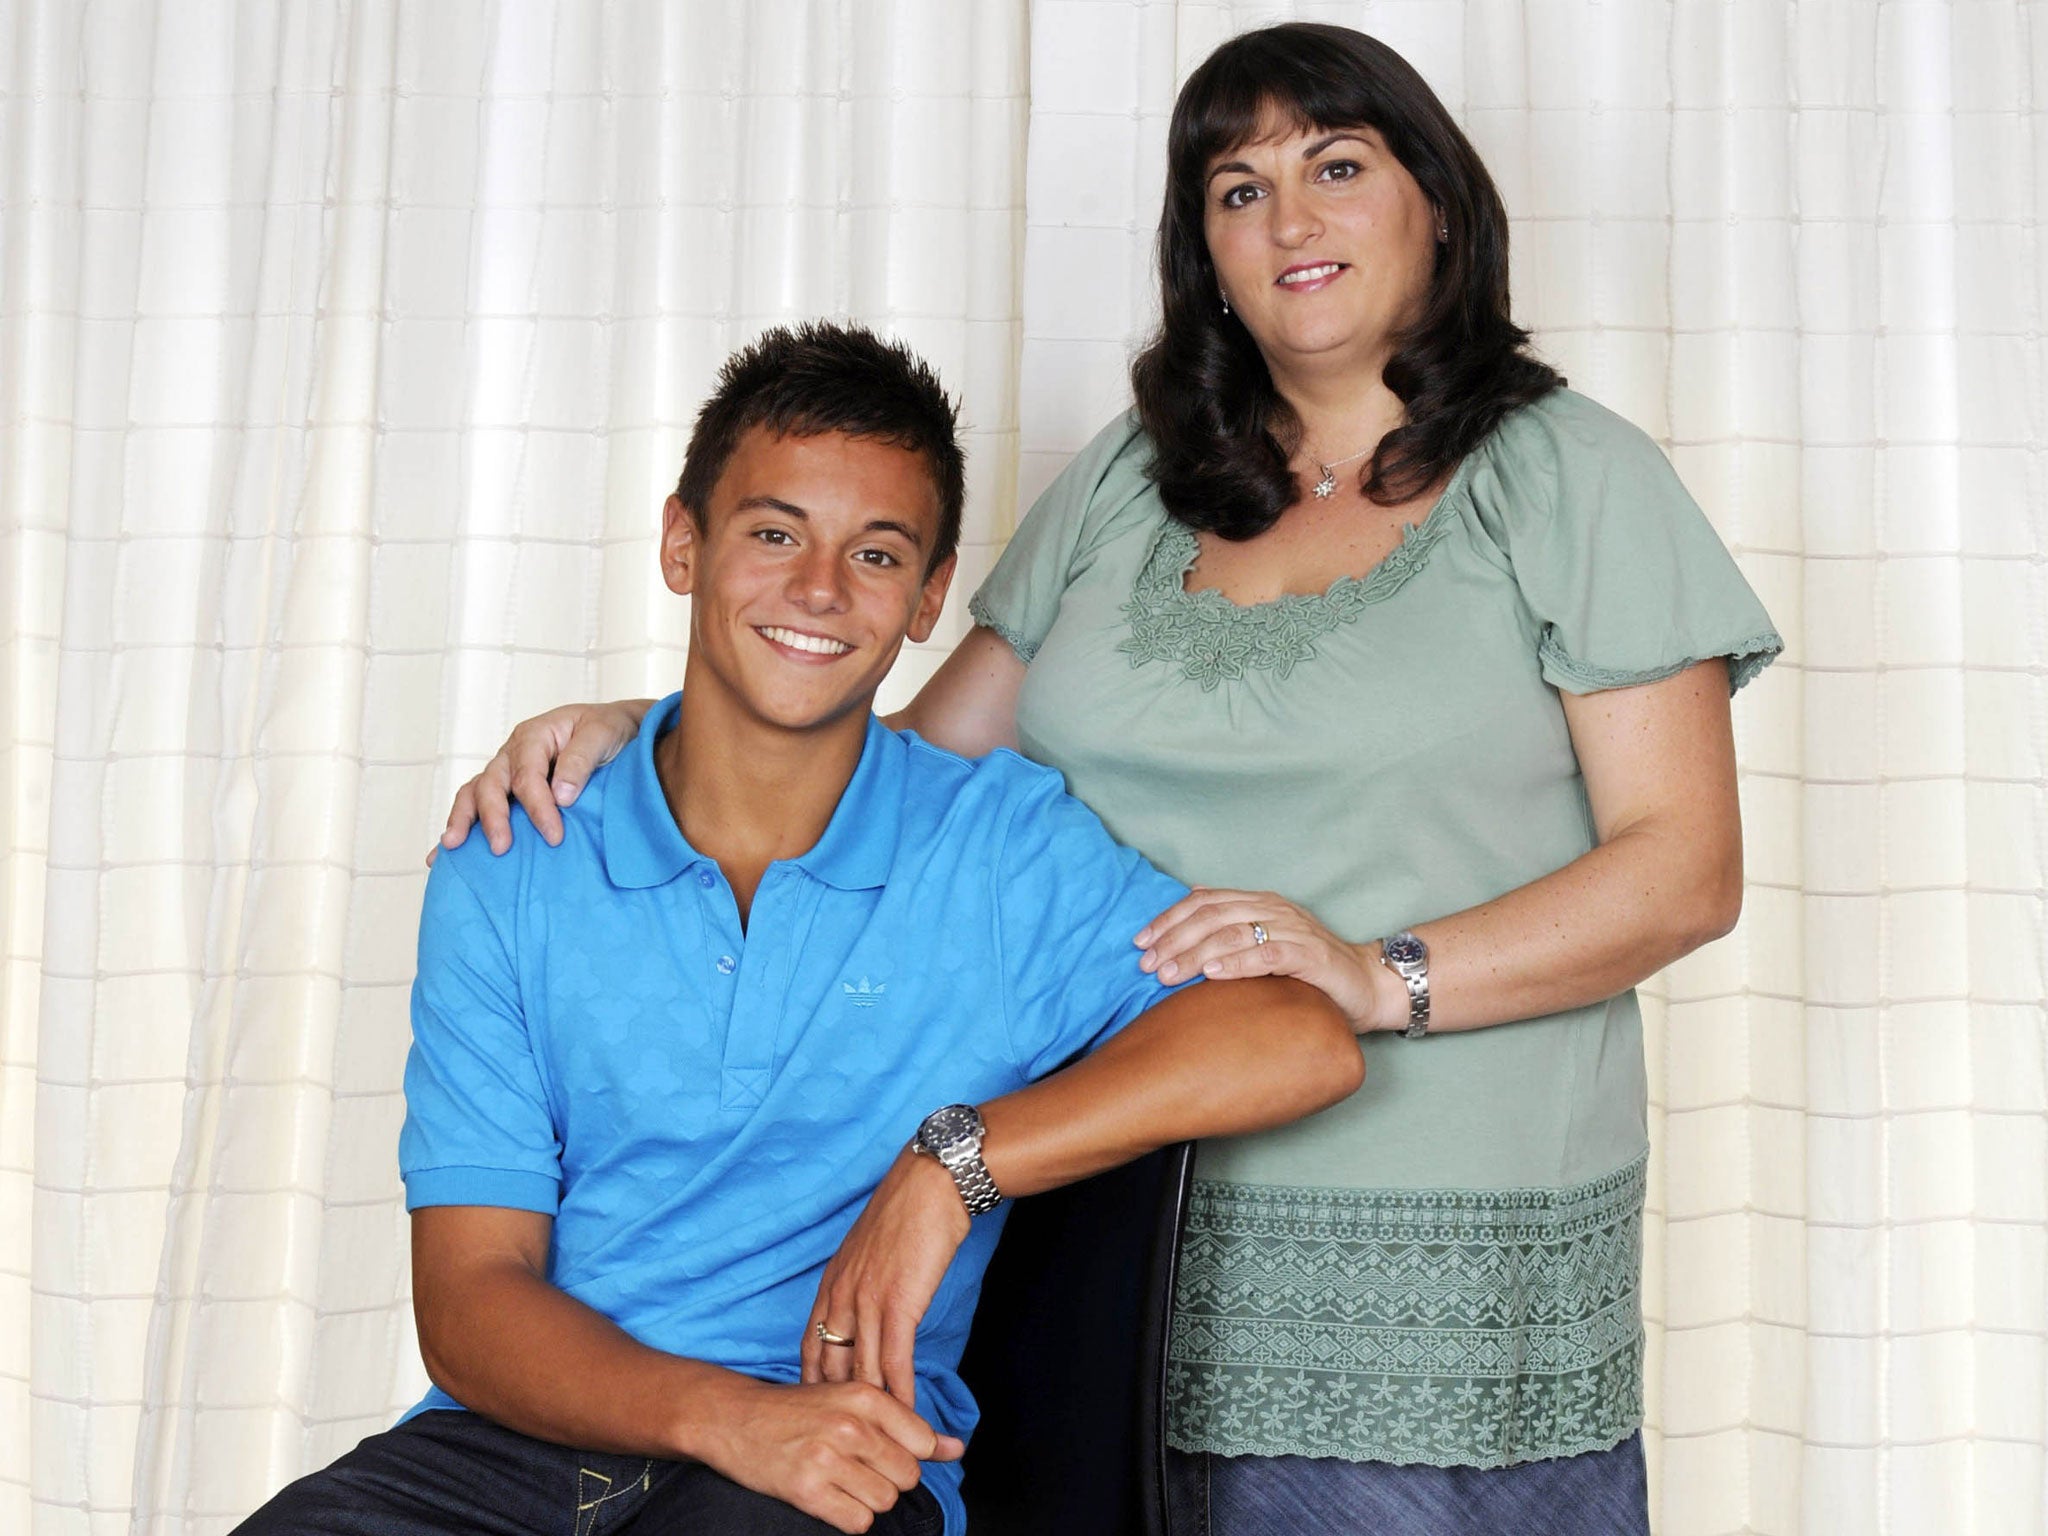 Tom Daley with his mother, who wrote an open letter to British Swimming chief executive David Sparkes